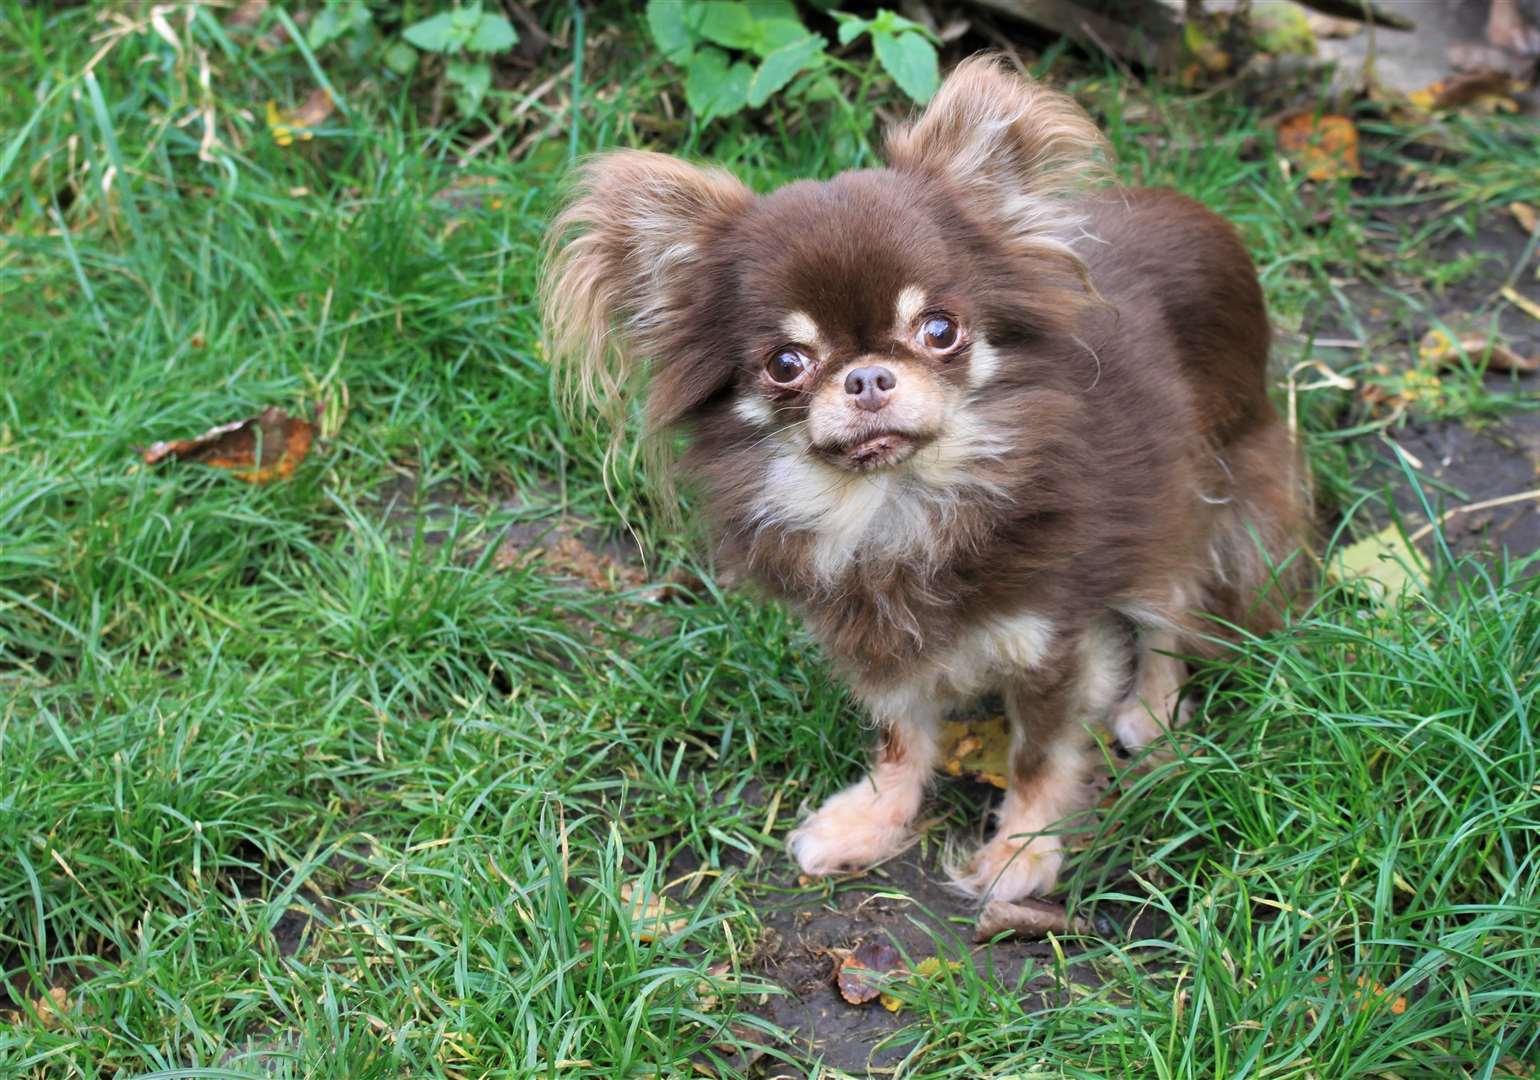 Have you seen this dog? Jenny Goode says her Chihuahua was stolen from her garden